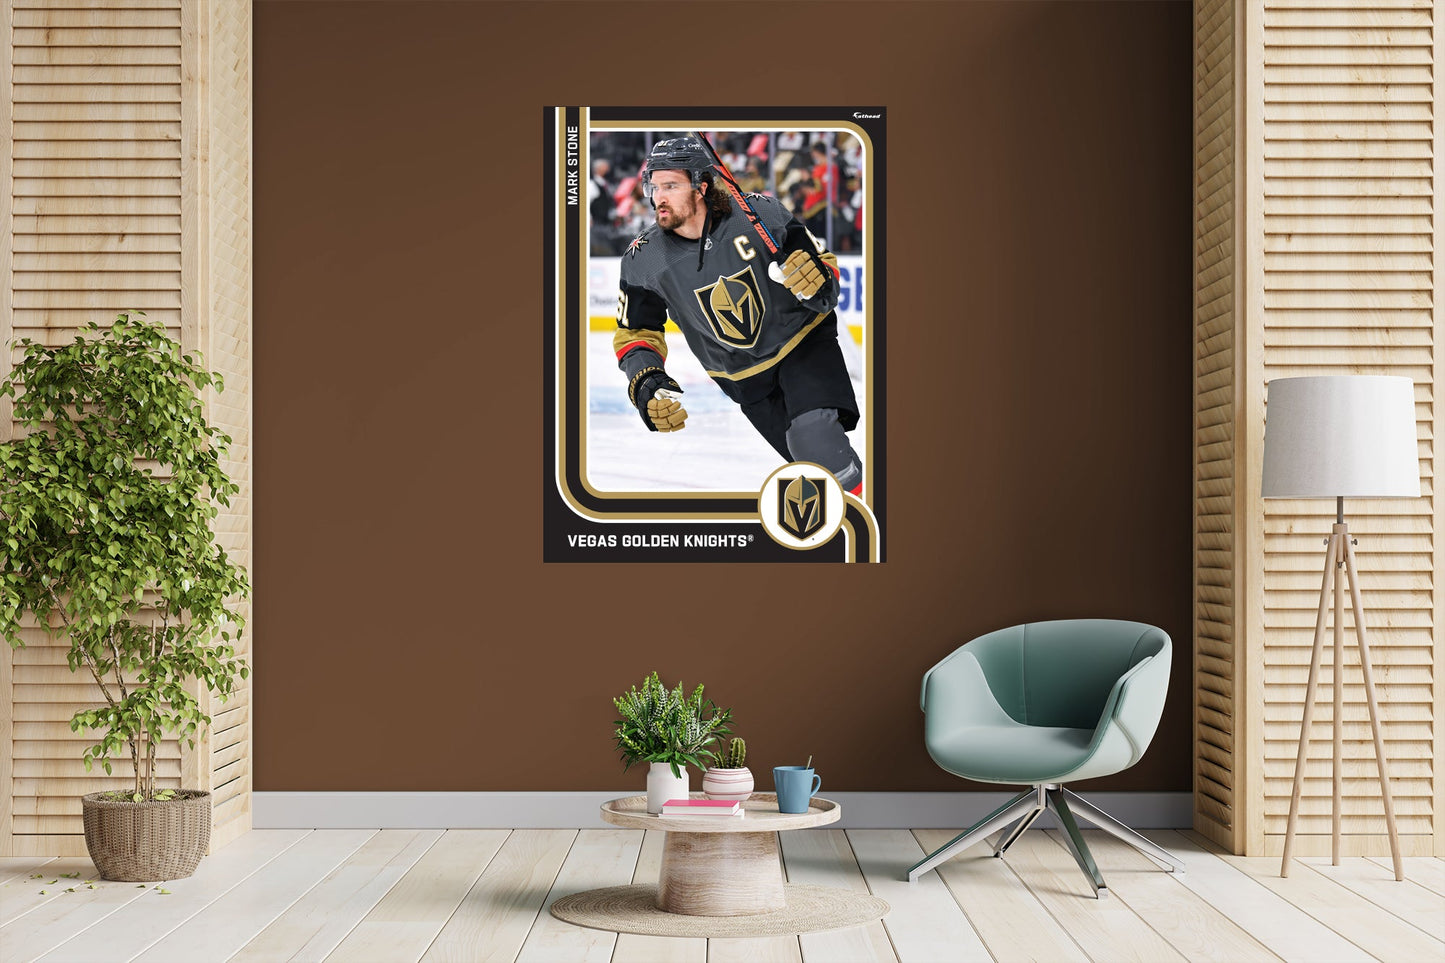 Vegas Golden Knights: Mark Stone Poster - Officially Licensed NHL Removable Adhesive Decal